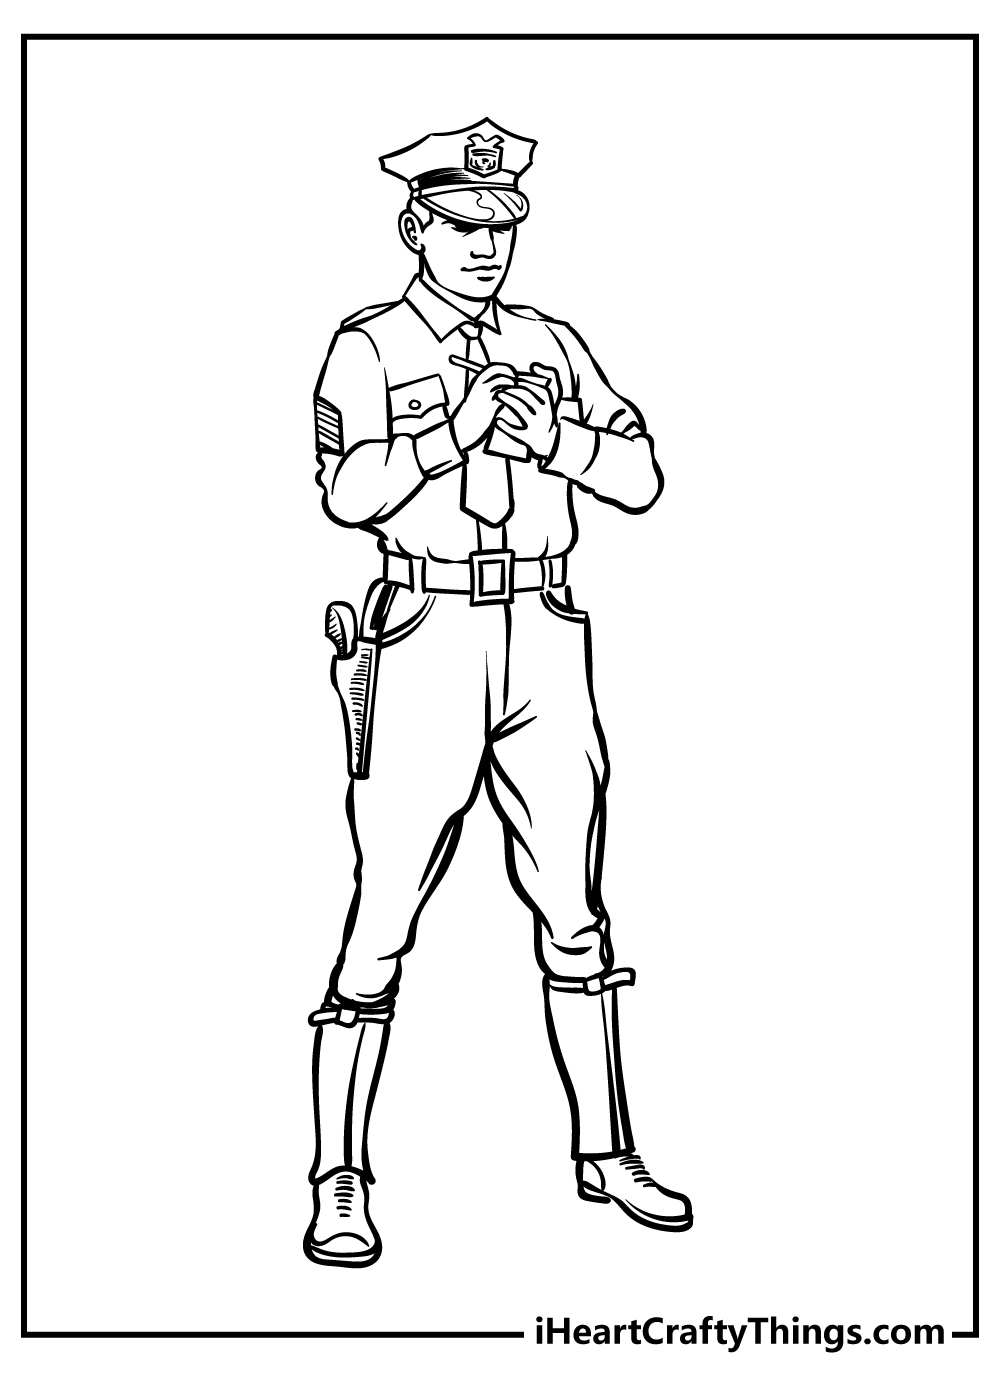 Police coloring pages free printables